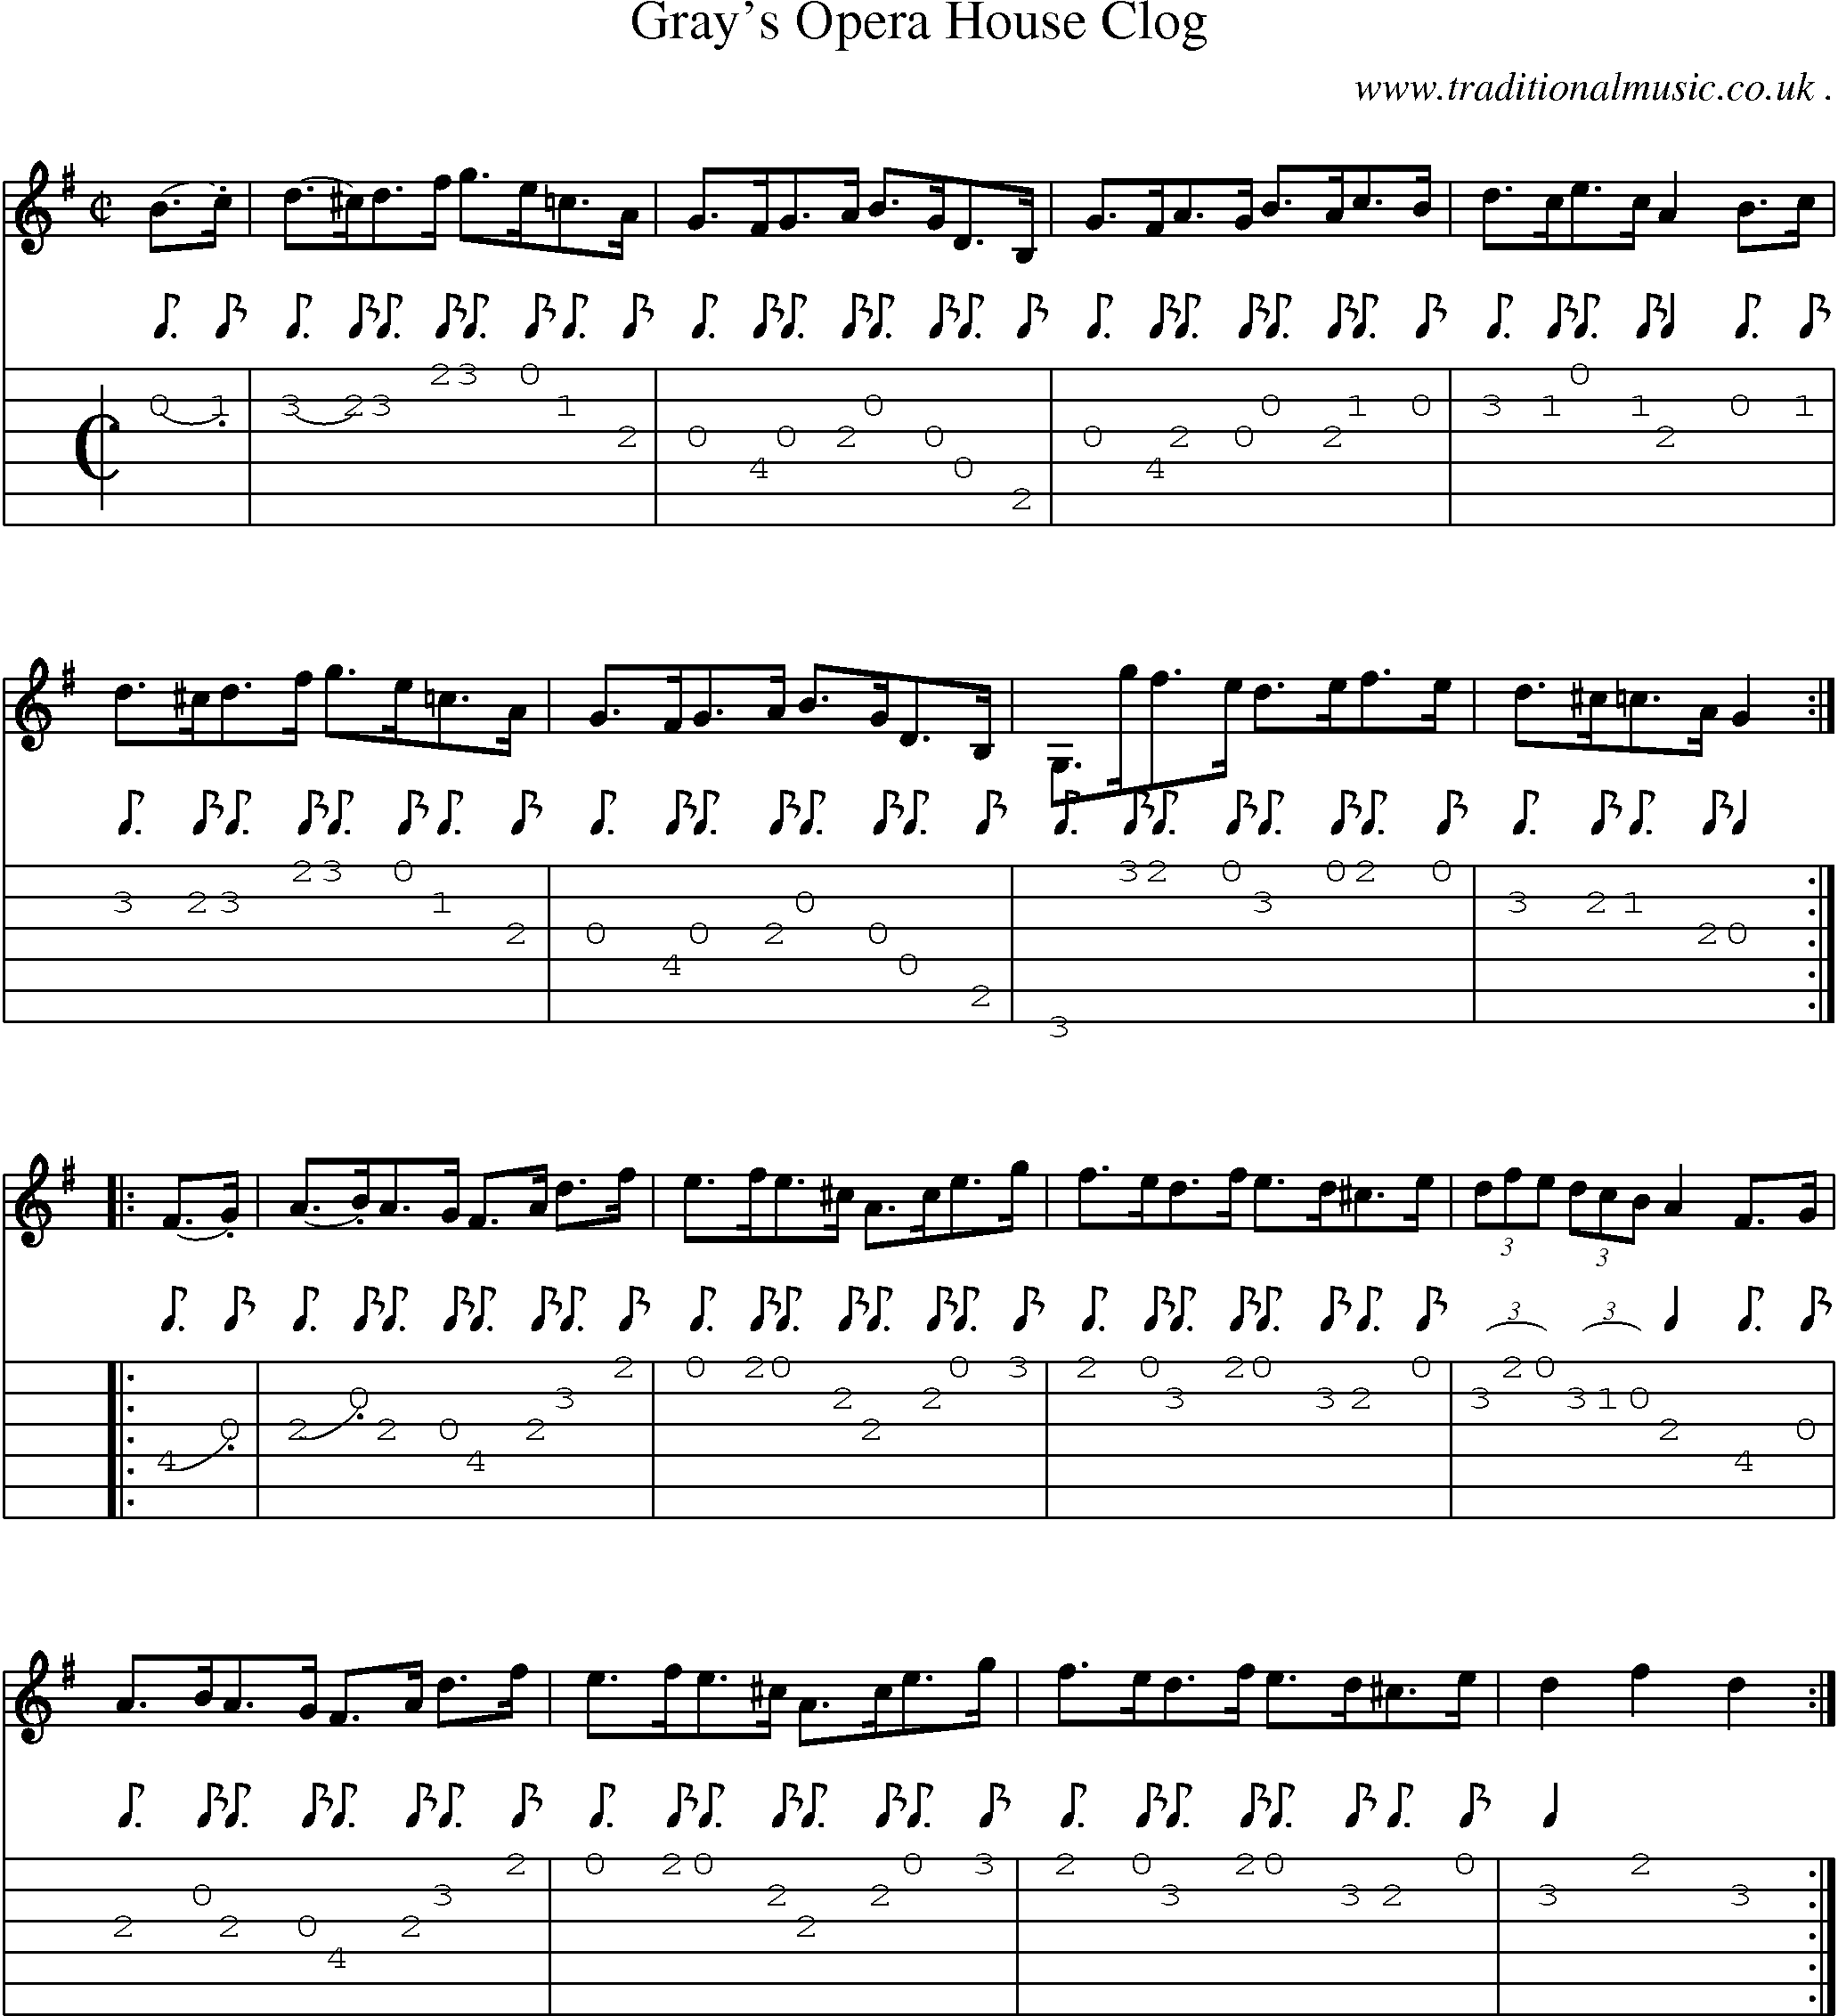 Sheet-Music and Guitar Tabs for Grays Opera House Clog